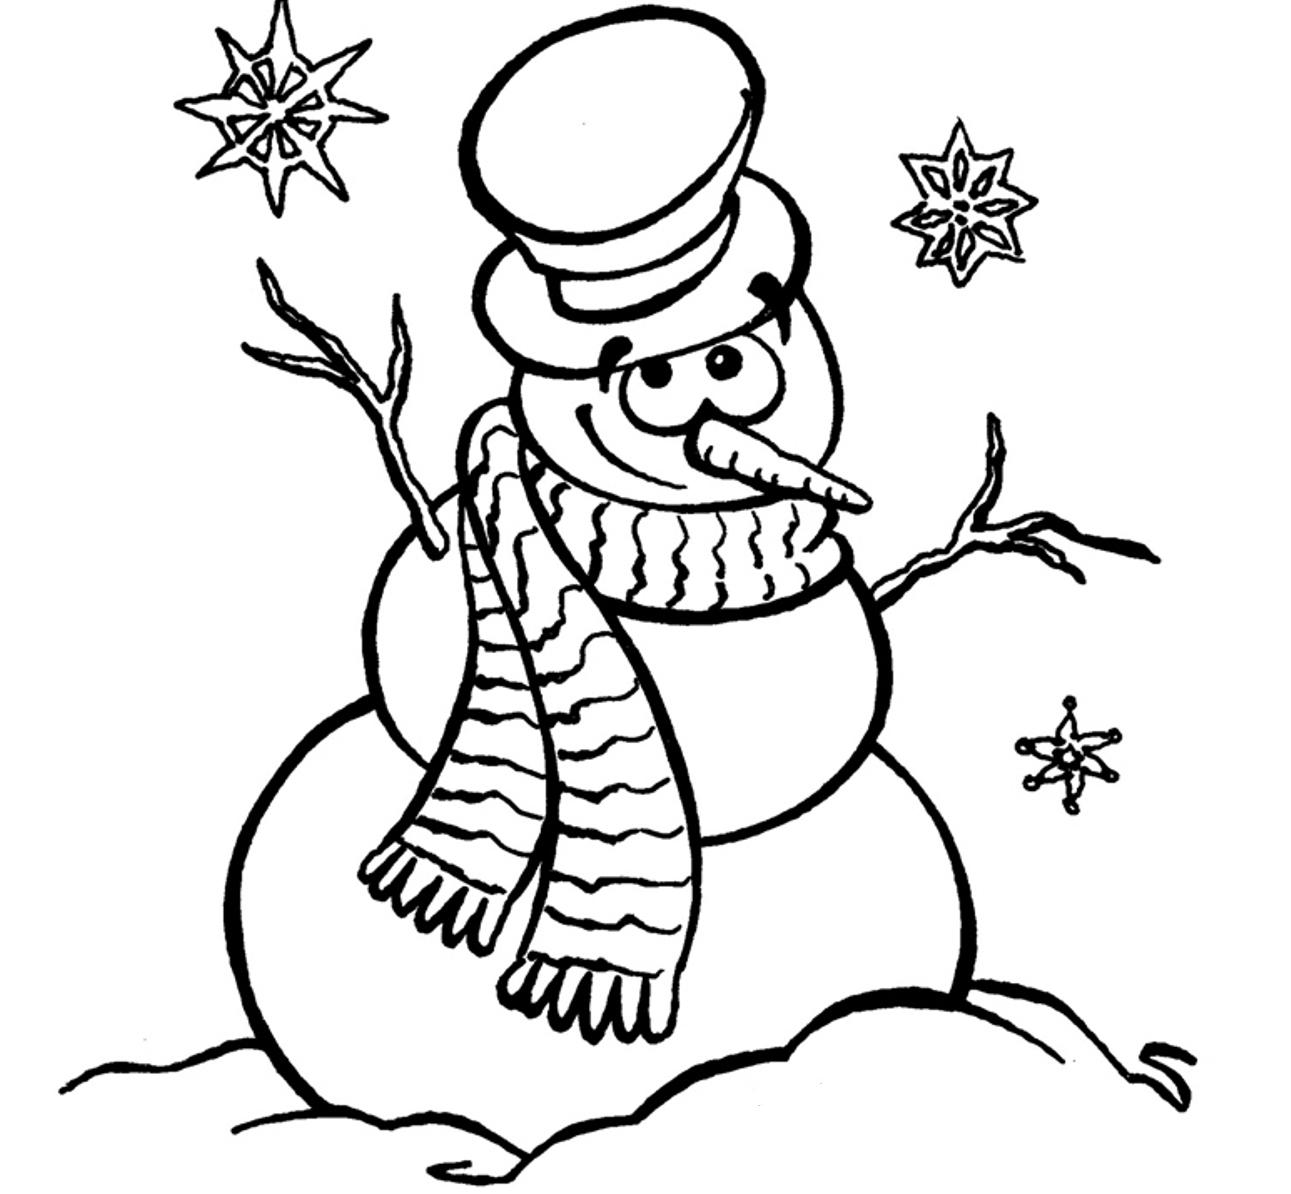 Smilling Snowman Sdc21 Coloring Page